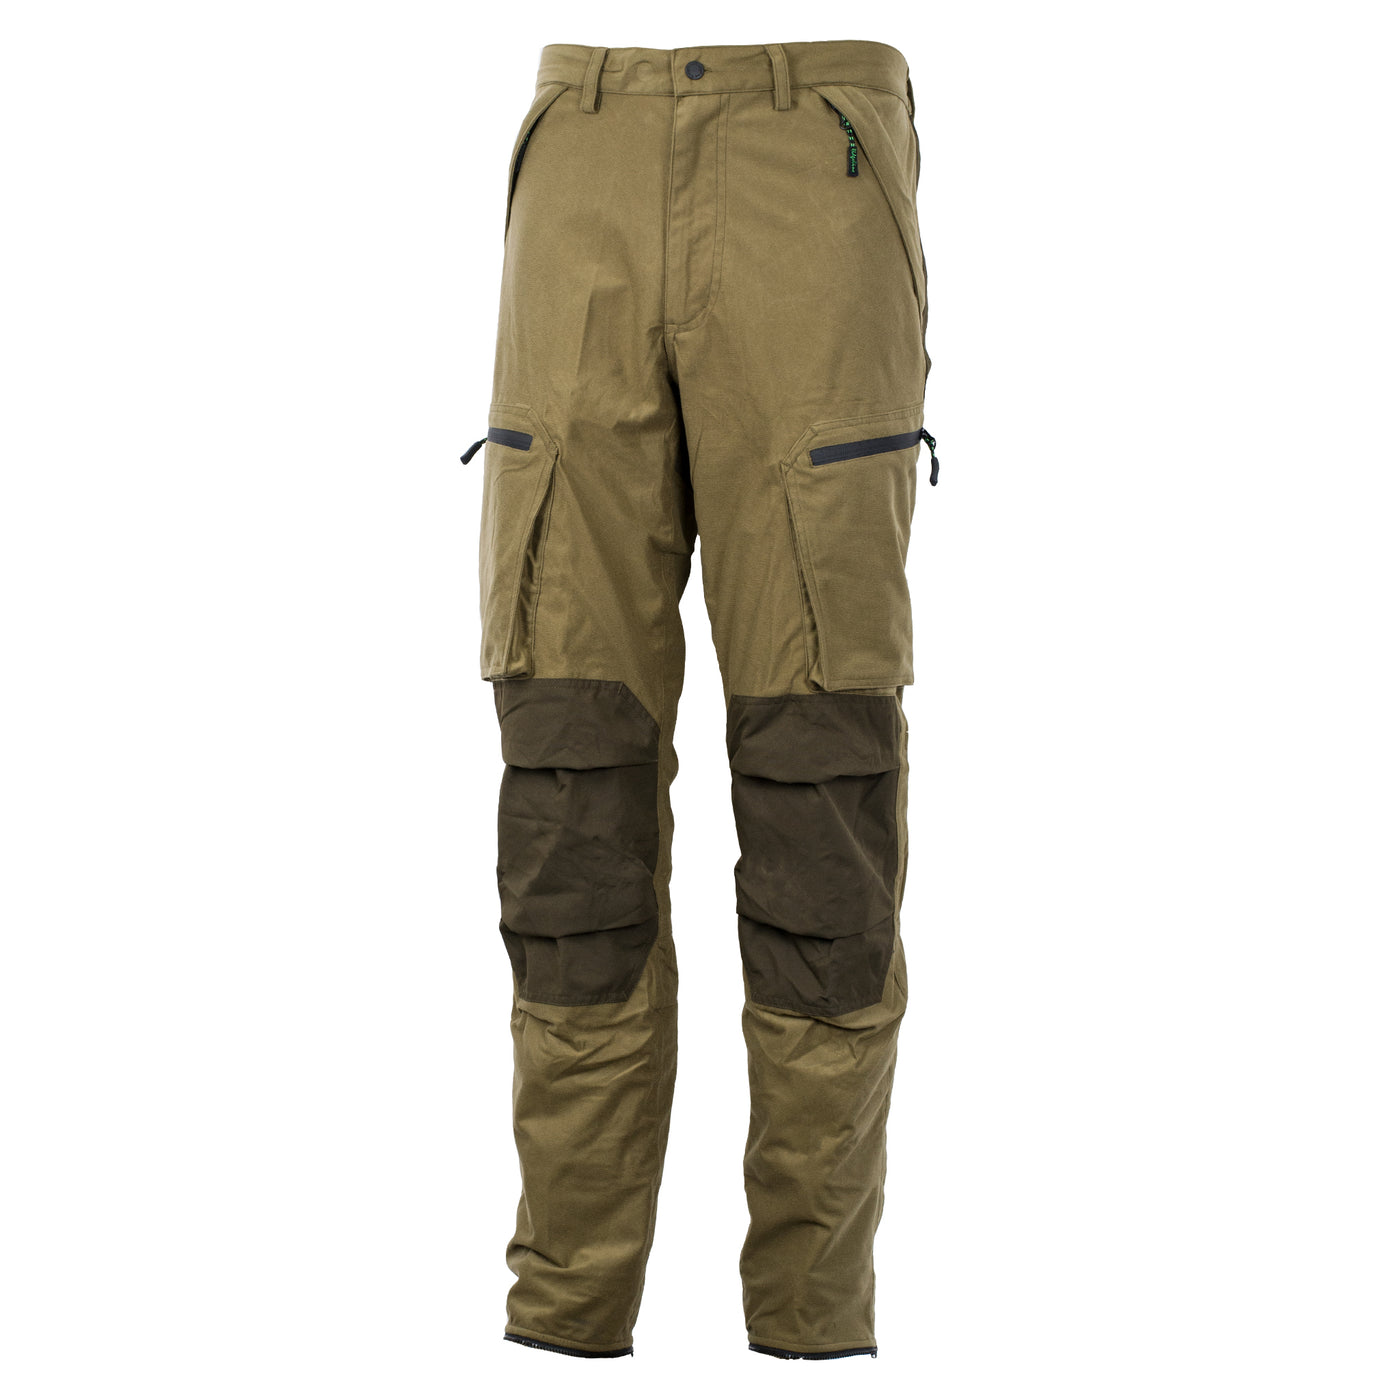 Rydale Waterproof Over Trousers Work Hiking Outdoor Trouser Pants 3 Colours   eBay